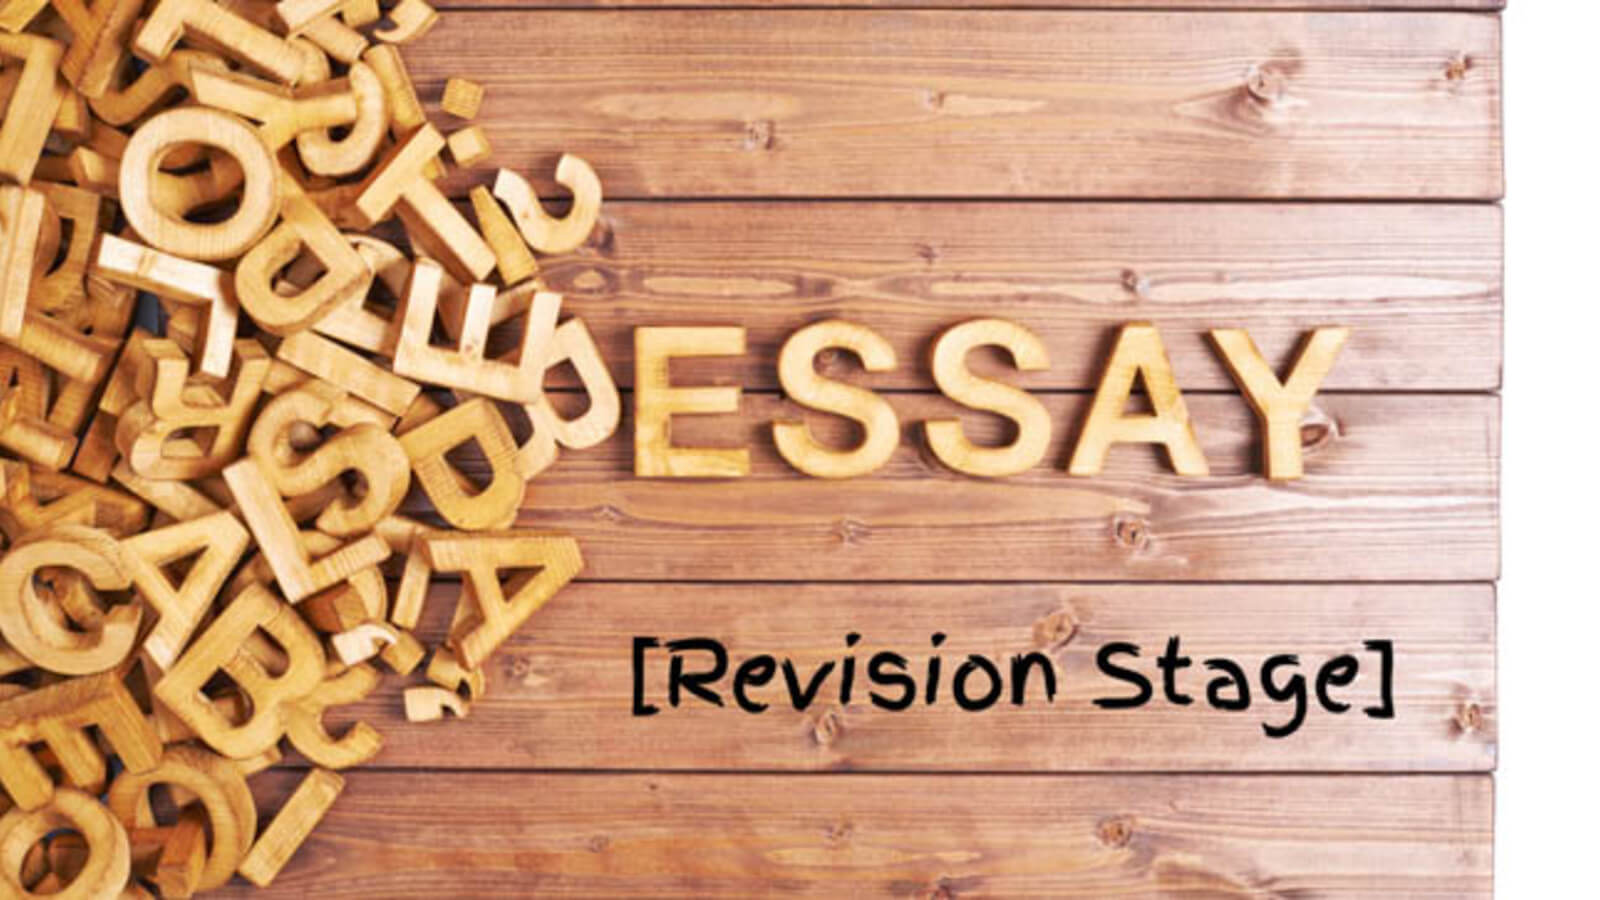 The College Essay Revision Stage